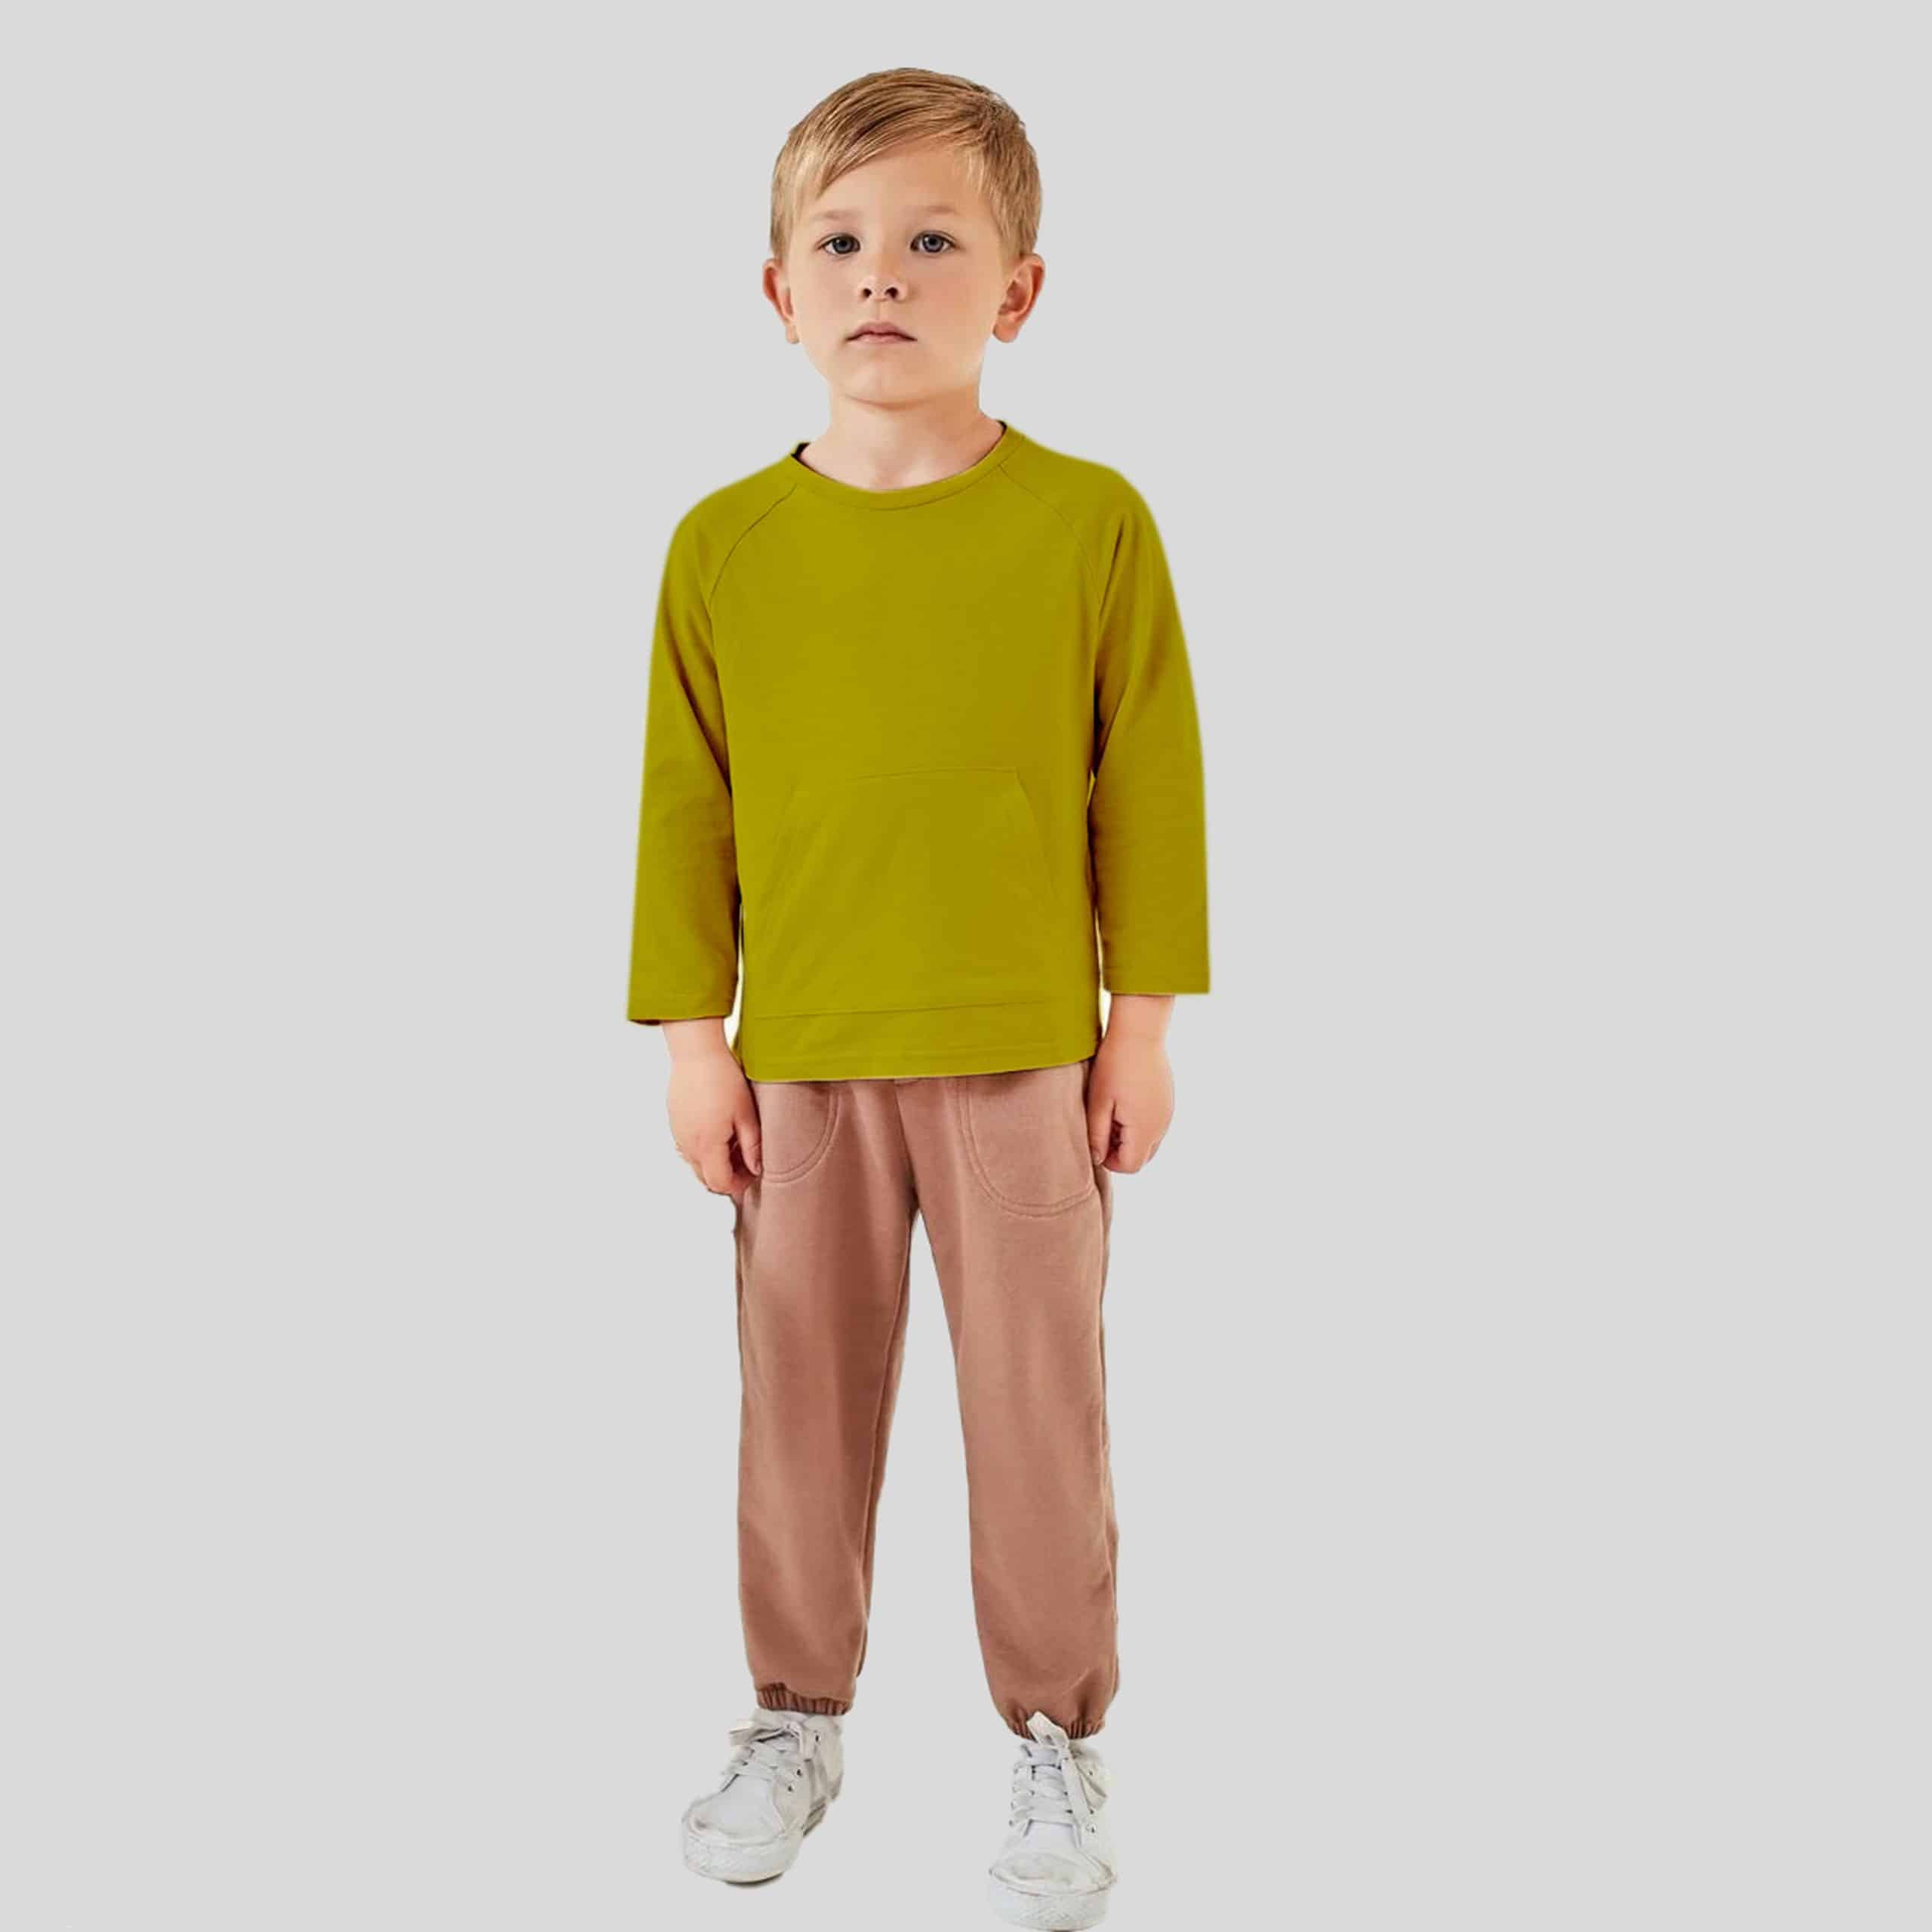 Boys Long Sleeve T-Shirt with Front Pockets - RKFCW363